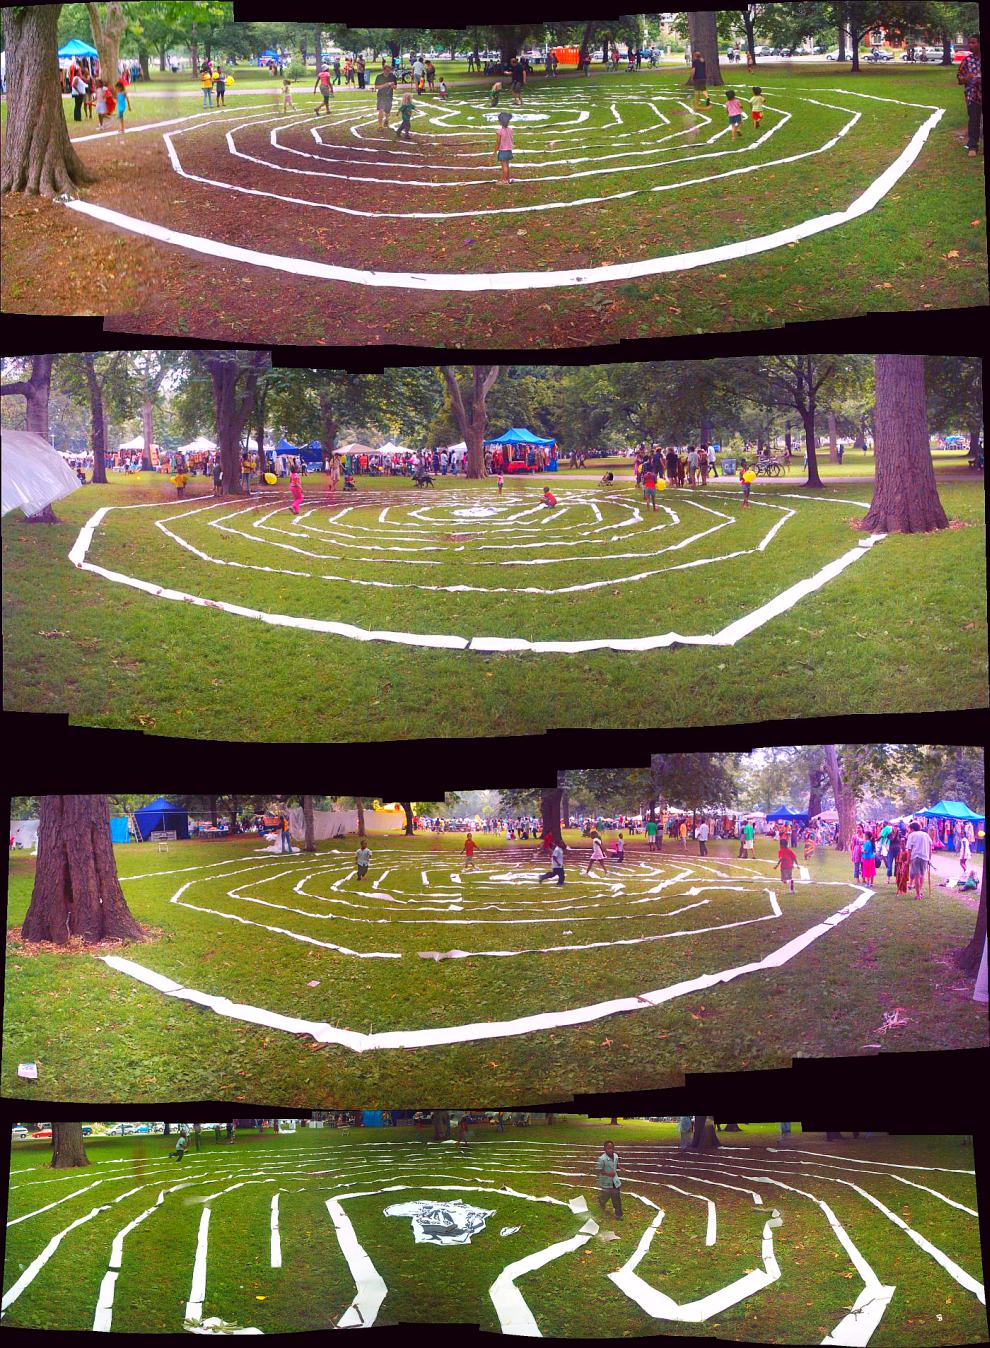 Afrofest Labyrinth Giant Outstallation Art by HiMY SYeD in Queen's Park